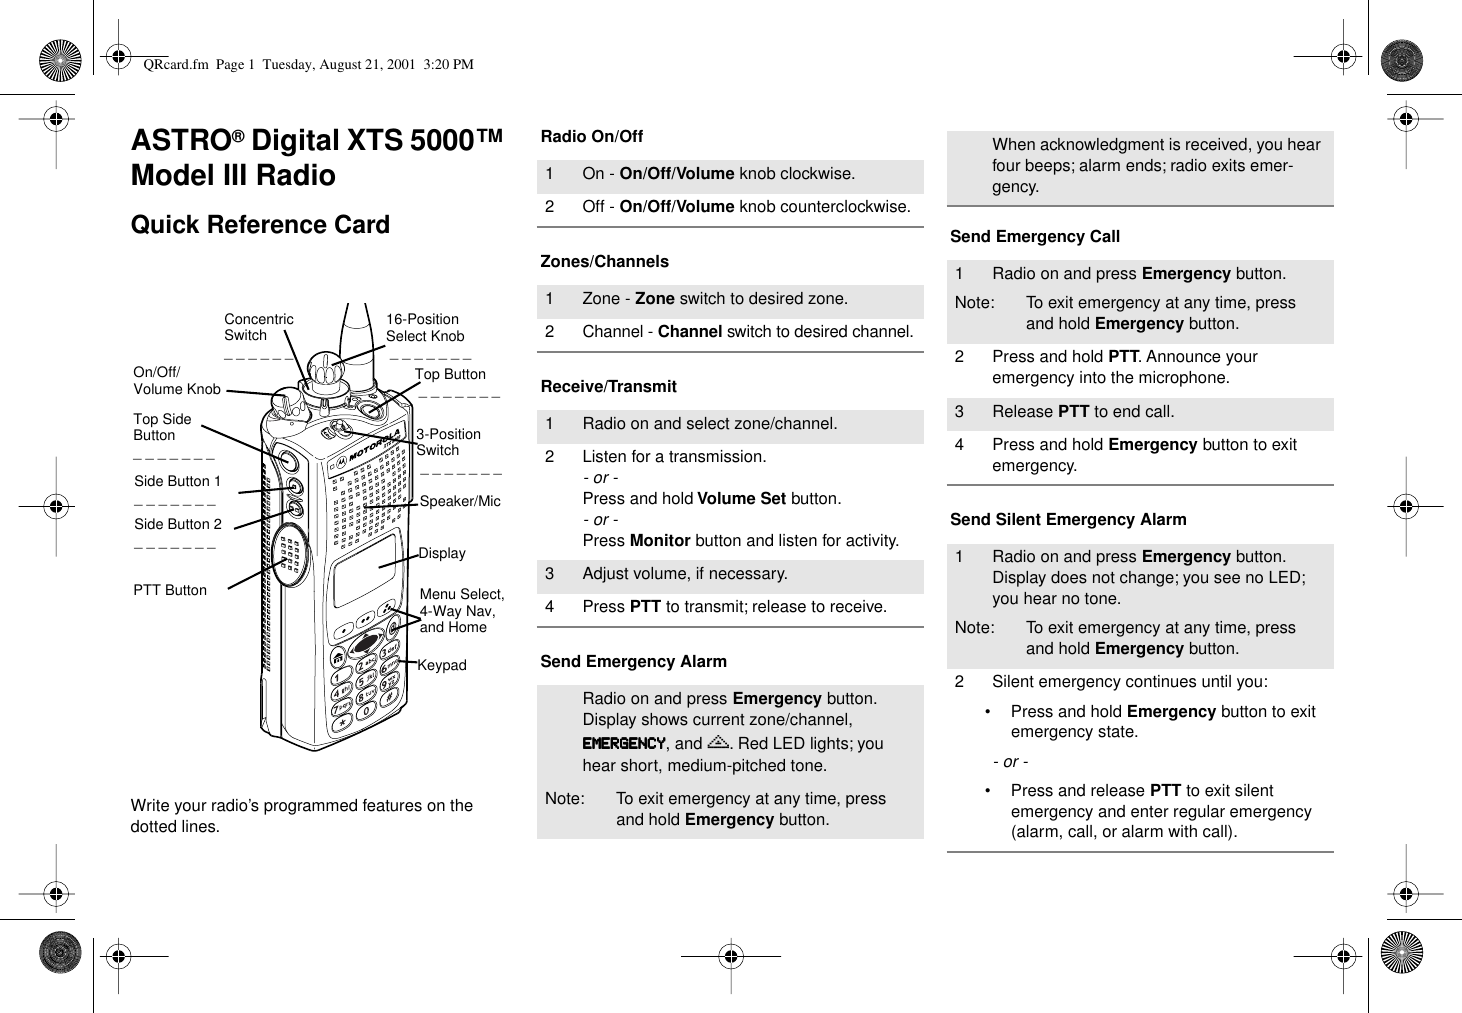  ASTRO ®  Digital XTS 5000™ Model III Radio Quick Reference Card Write your radio’s programmed features on the dotted lines. Radio On/OffZones/ChannelsReceive/TransmitSend Emergency AlarmSend Emergency CallSend Silent Emergency Alarm16-Position Select Knob _ _ _ _ _ _ _Speaker/MicTop Button _ _ _ _ _ _ _Concentric Switch_ _ _ _ _ _ DisplayKeypadMenu Select, 4-Way Nav, and Home Top Side Button_ _ _ _ _ _ _On/Off/Volume KnobSide Button 1_ _ _ _ _ _ _Side Button 2_ _ _ _ _ _ _PTT Button3-Position Switch _ _ _ _ _ _ _ 1 On -  On/Off/Volume  knob clockwise.2 Off -  On/Off/Volume  knob counterclockwise.1 Zone -  Zone  switch to desired zone.2 Channel -  Channel  switch to desired channel.1 Radio on and select zone/channel.2 Listen for a transmission. - or - Press and hold  Volume Set  button. - or - Press  Monitor  button and listen for activity.3 Adjust volume, if necessary.4 Press  PTT  to transmit; release to receive.Radio on and press  Emergency  button. Display shows current zone/channel,   EEEEMMMMEEEERRRRGGGGEEEENNNNCCCCYYYY , and  e . Red LED lights; you hear short, medium-pitched tone.Note: To exit emergency at any time, press and hold  Emergency  button.When acknowledgment is received, you hear four beeps; alarm ends; radio exits emer-gency.1 Radio on and press  Emergency  button.Note: To exit emergency at any time, press and hold  Emergency  button.2 Press and hold  PTT . Announce your emergency into the microphone.3 Release  PTT  to end call.4 Press and hold  Emergency  button to exit emergency. 1 Radio on and press  Emergency  button. Display does not change; you see no LED; you hear no tone.Note: To exit emergency at any time, press and hold  Emergency  button.2 Silent emergency continues until you:• Press and hold  Emergency  button to exit emergency state. - or - • Press and release  PTT  to exit silent emergency and enter regular emergency (alarm, call, or alarm with call). QRcard.fm  Page 1  Tuesday, August 21, 2001  3:20 PM